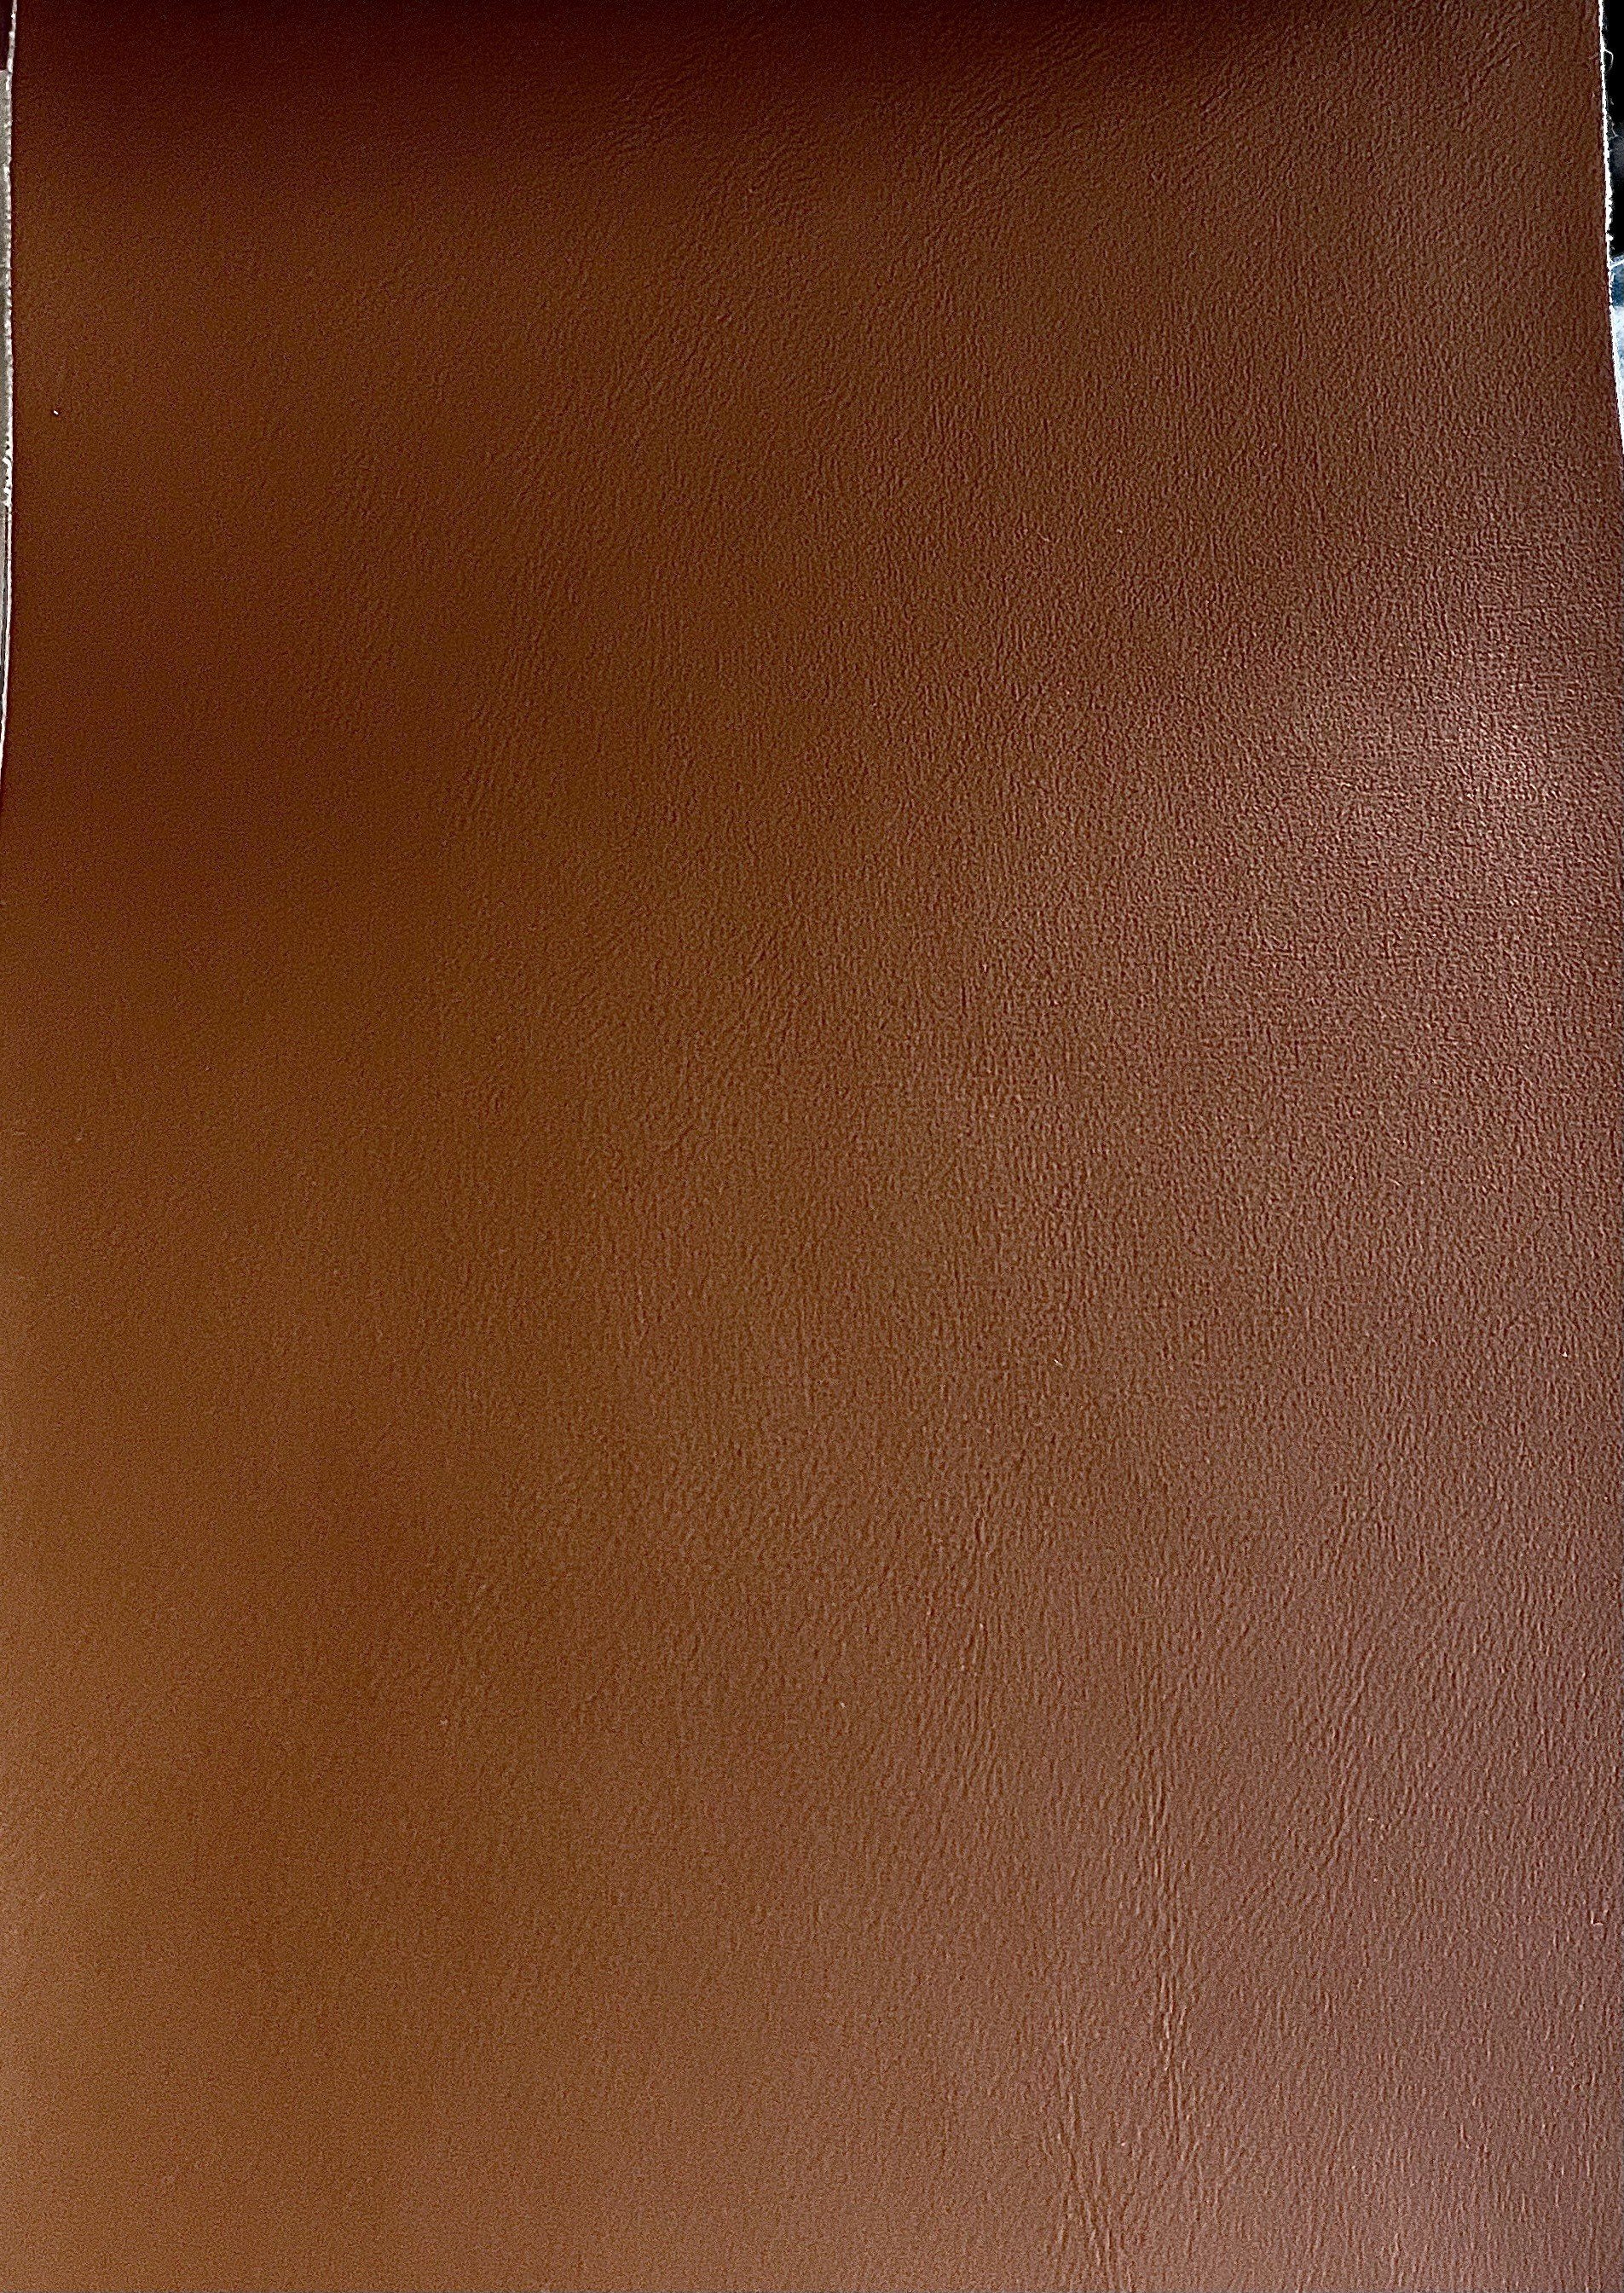 Silicone leather - Brown - LG2106-19